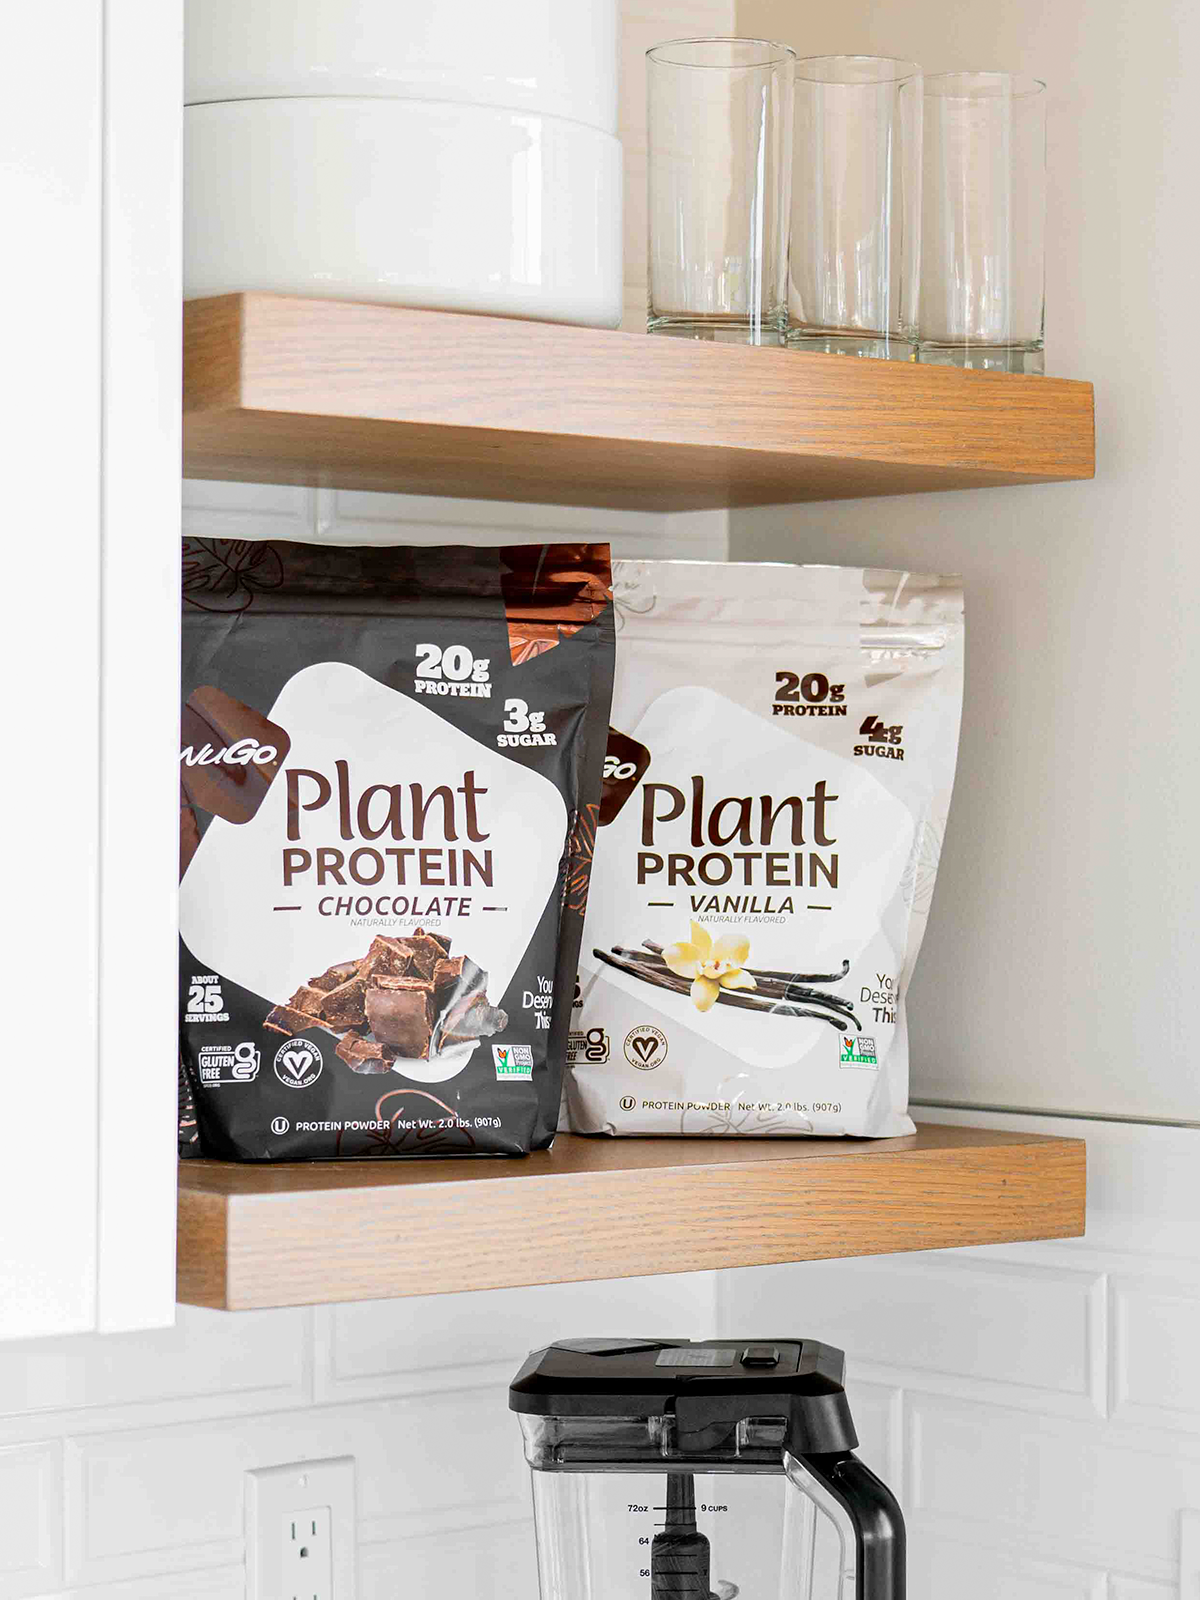 A bag of Chocolate and a bag of Vanilla Protein Powder on woooden shelf